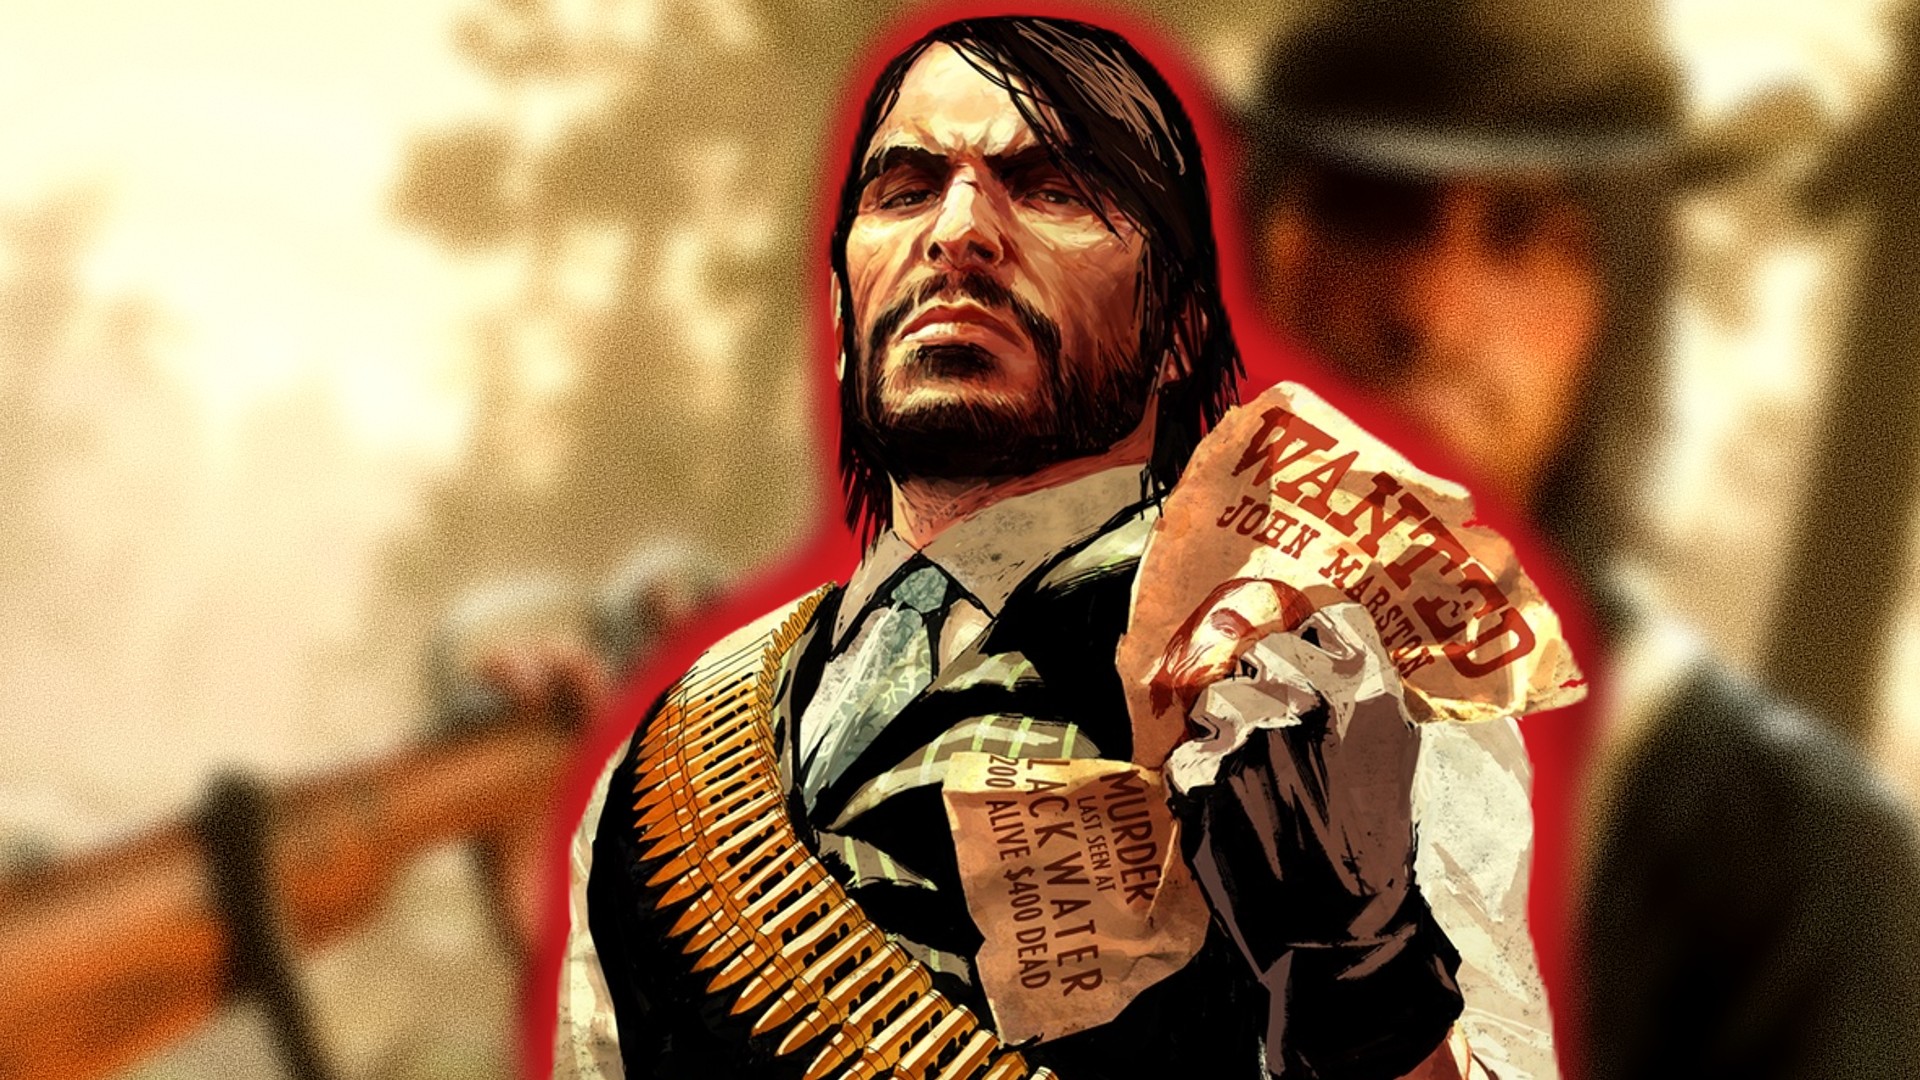 Red Dead Redemption 1 Remaster is in the Works – Rumour